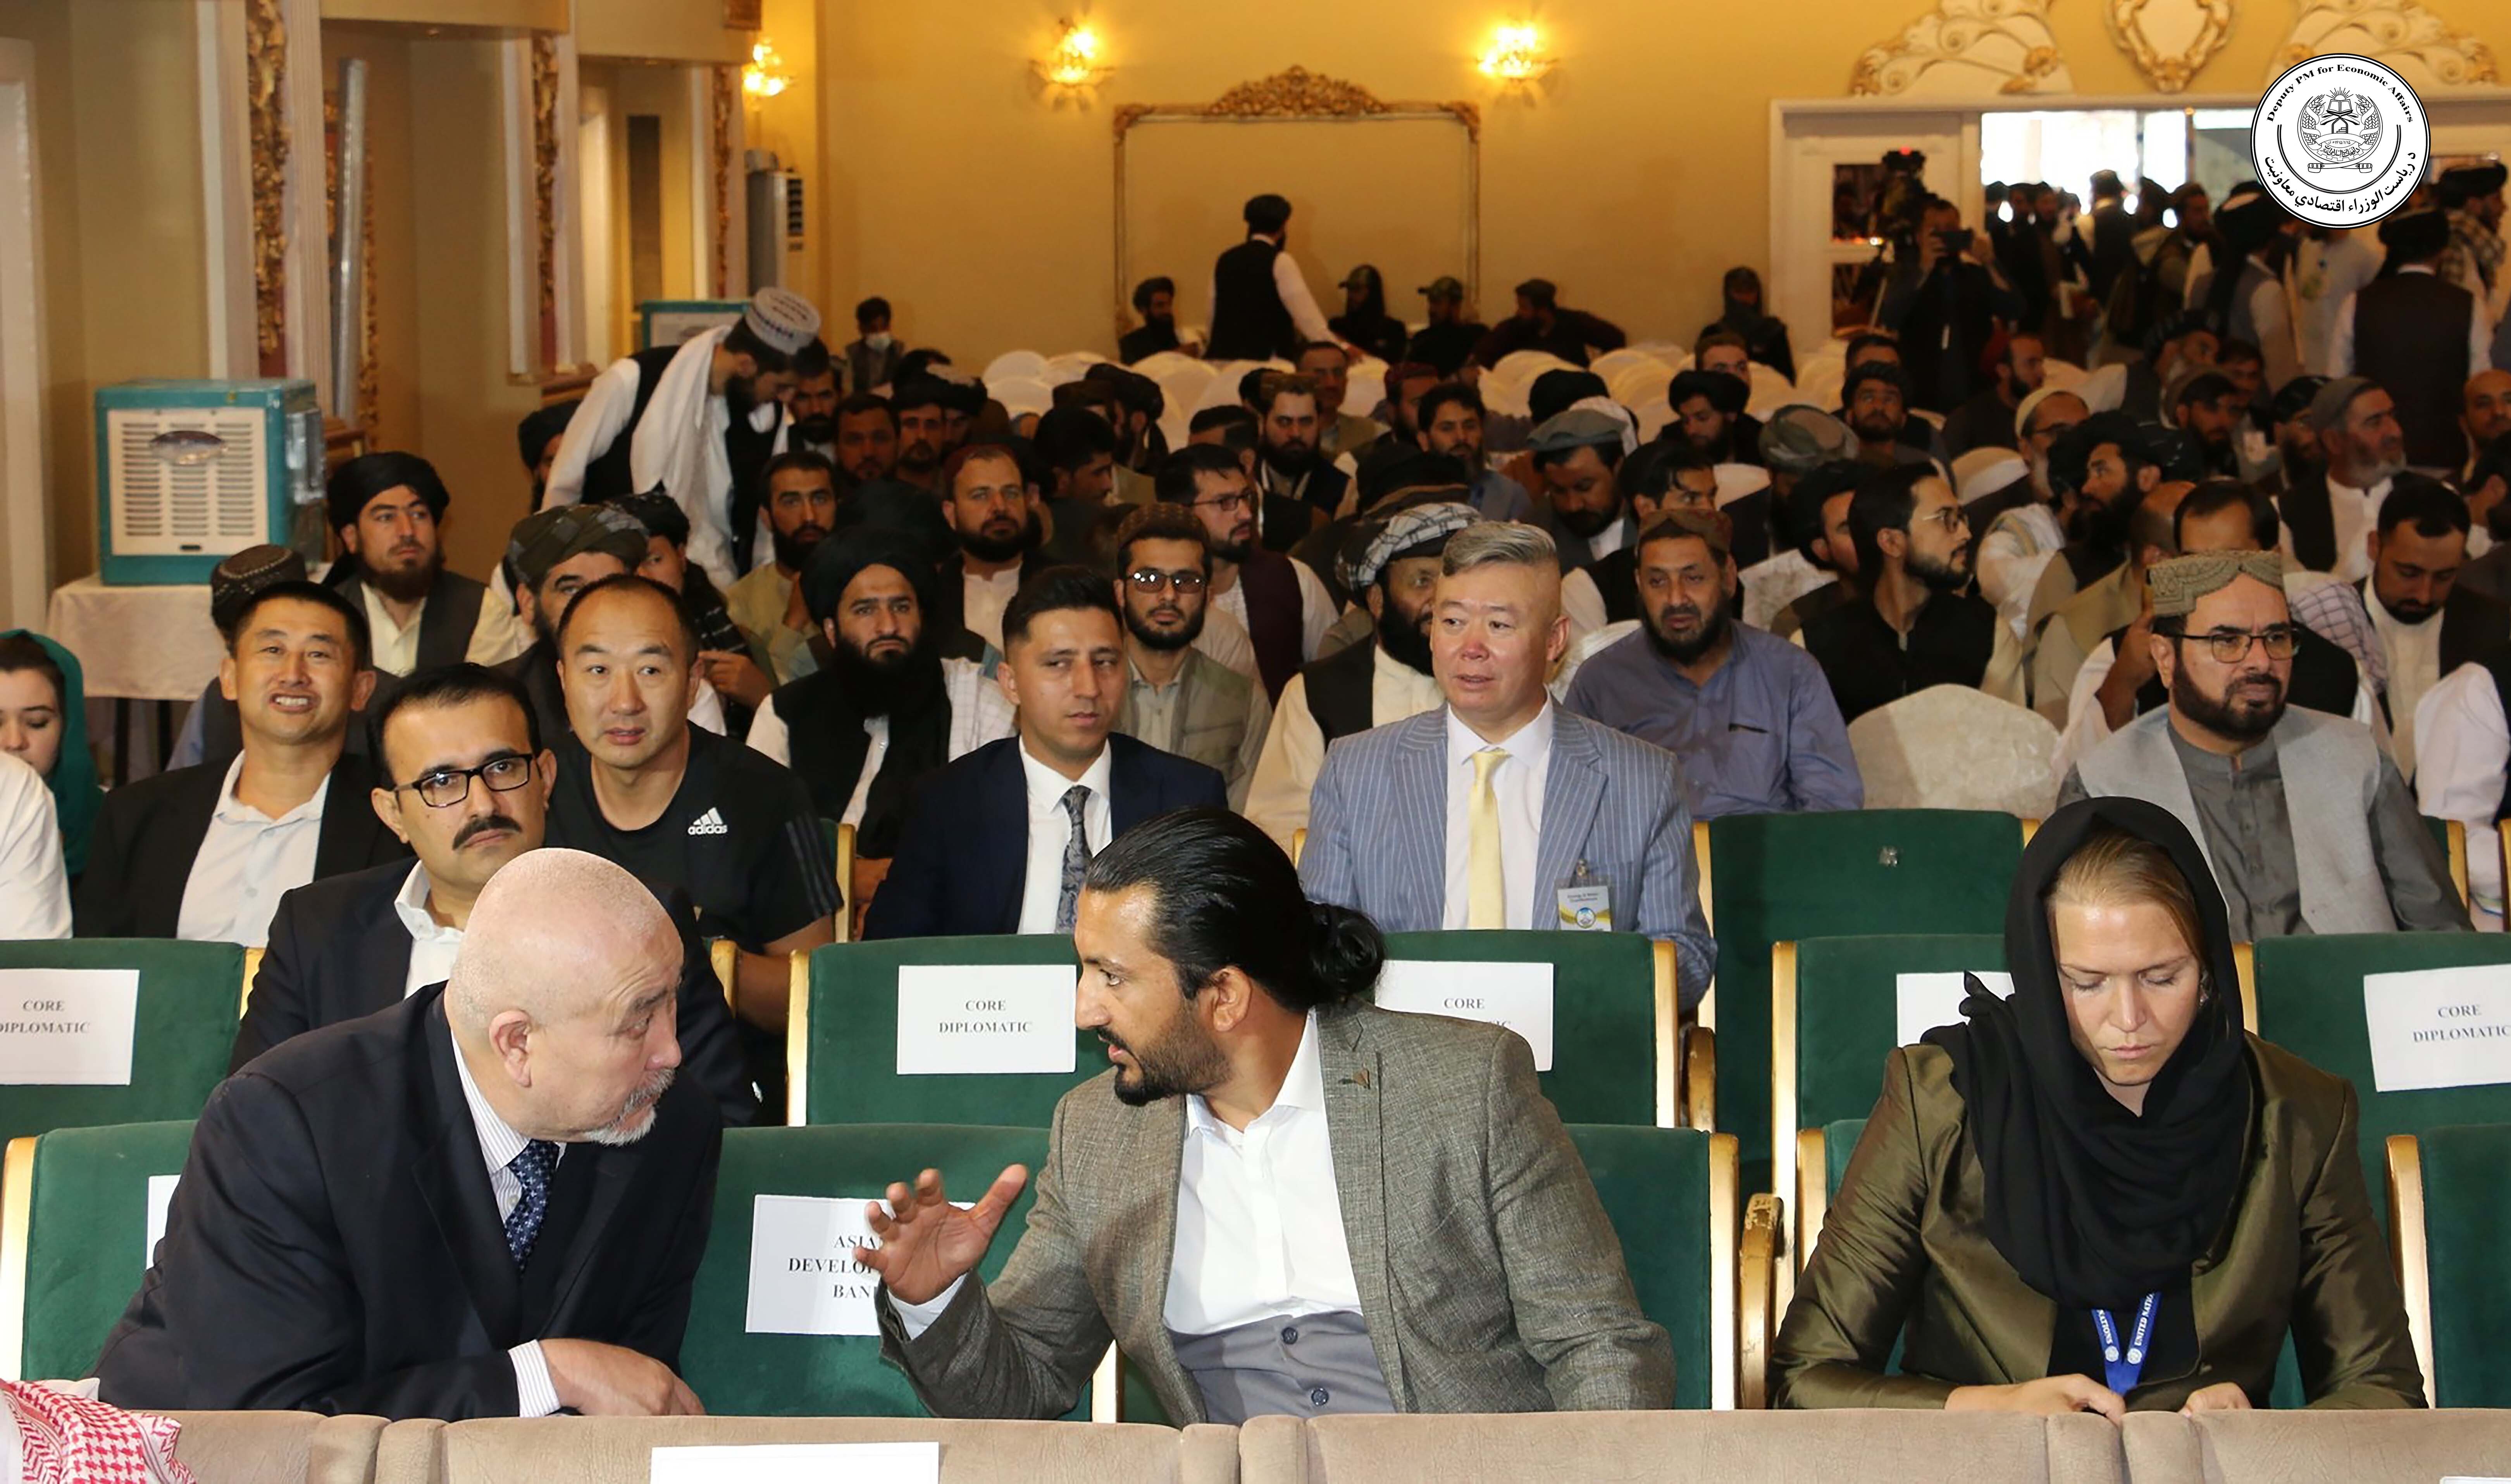 Hajji Mullah Abdul Ghani Beradar Akhund Participated In The Conference On The Attraction And Promotion Of National And International Investments In The Water And Energy Sectors